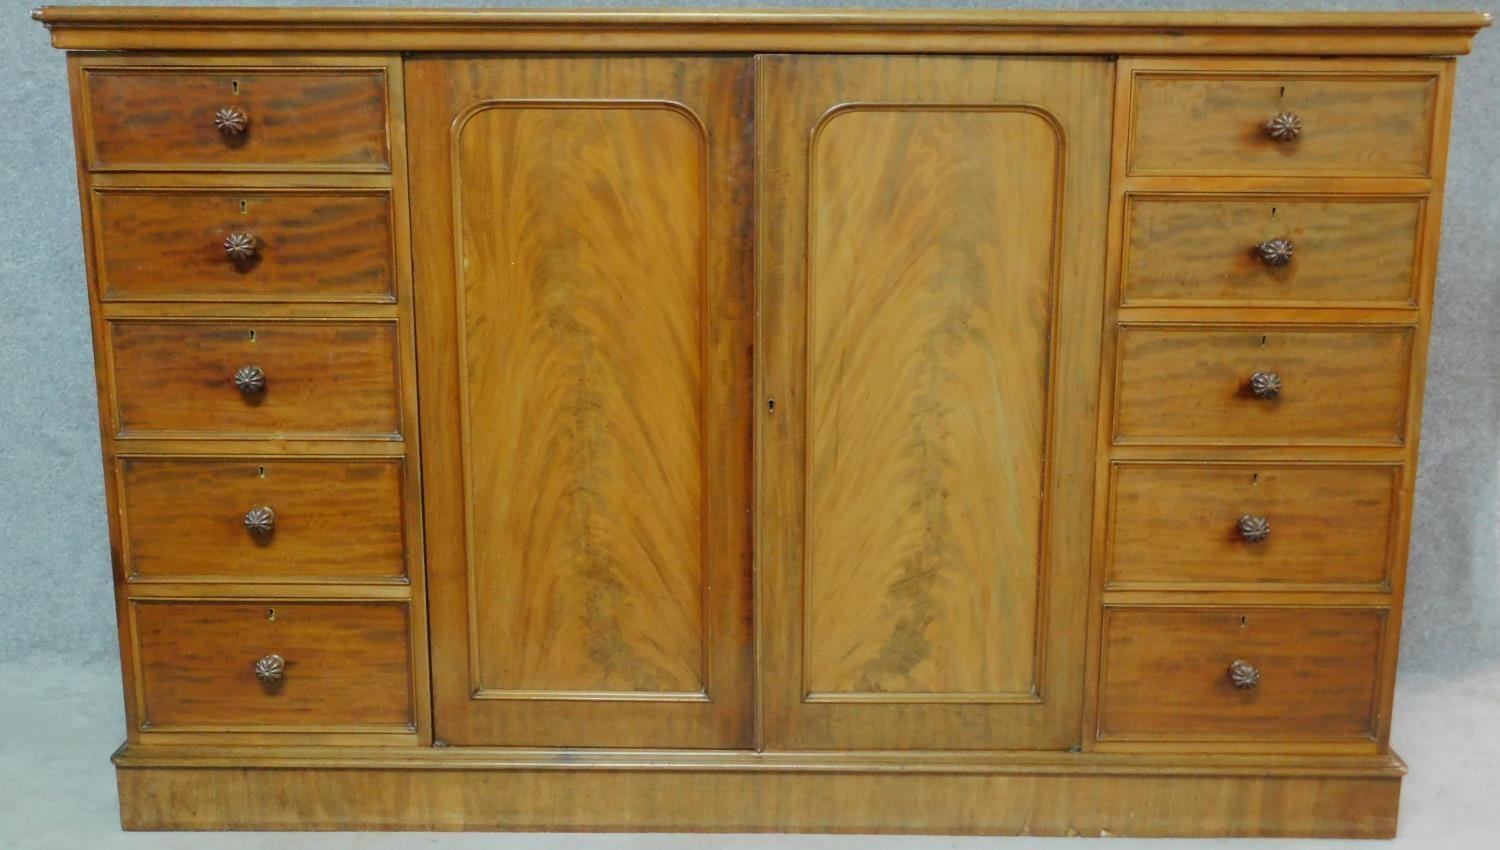 A Regency mahogany press cupboard with fitted central panel doors enclosing linen slides, flanked by